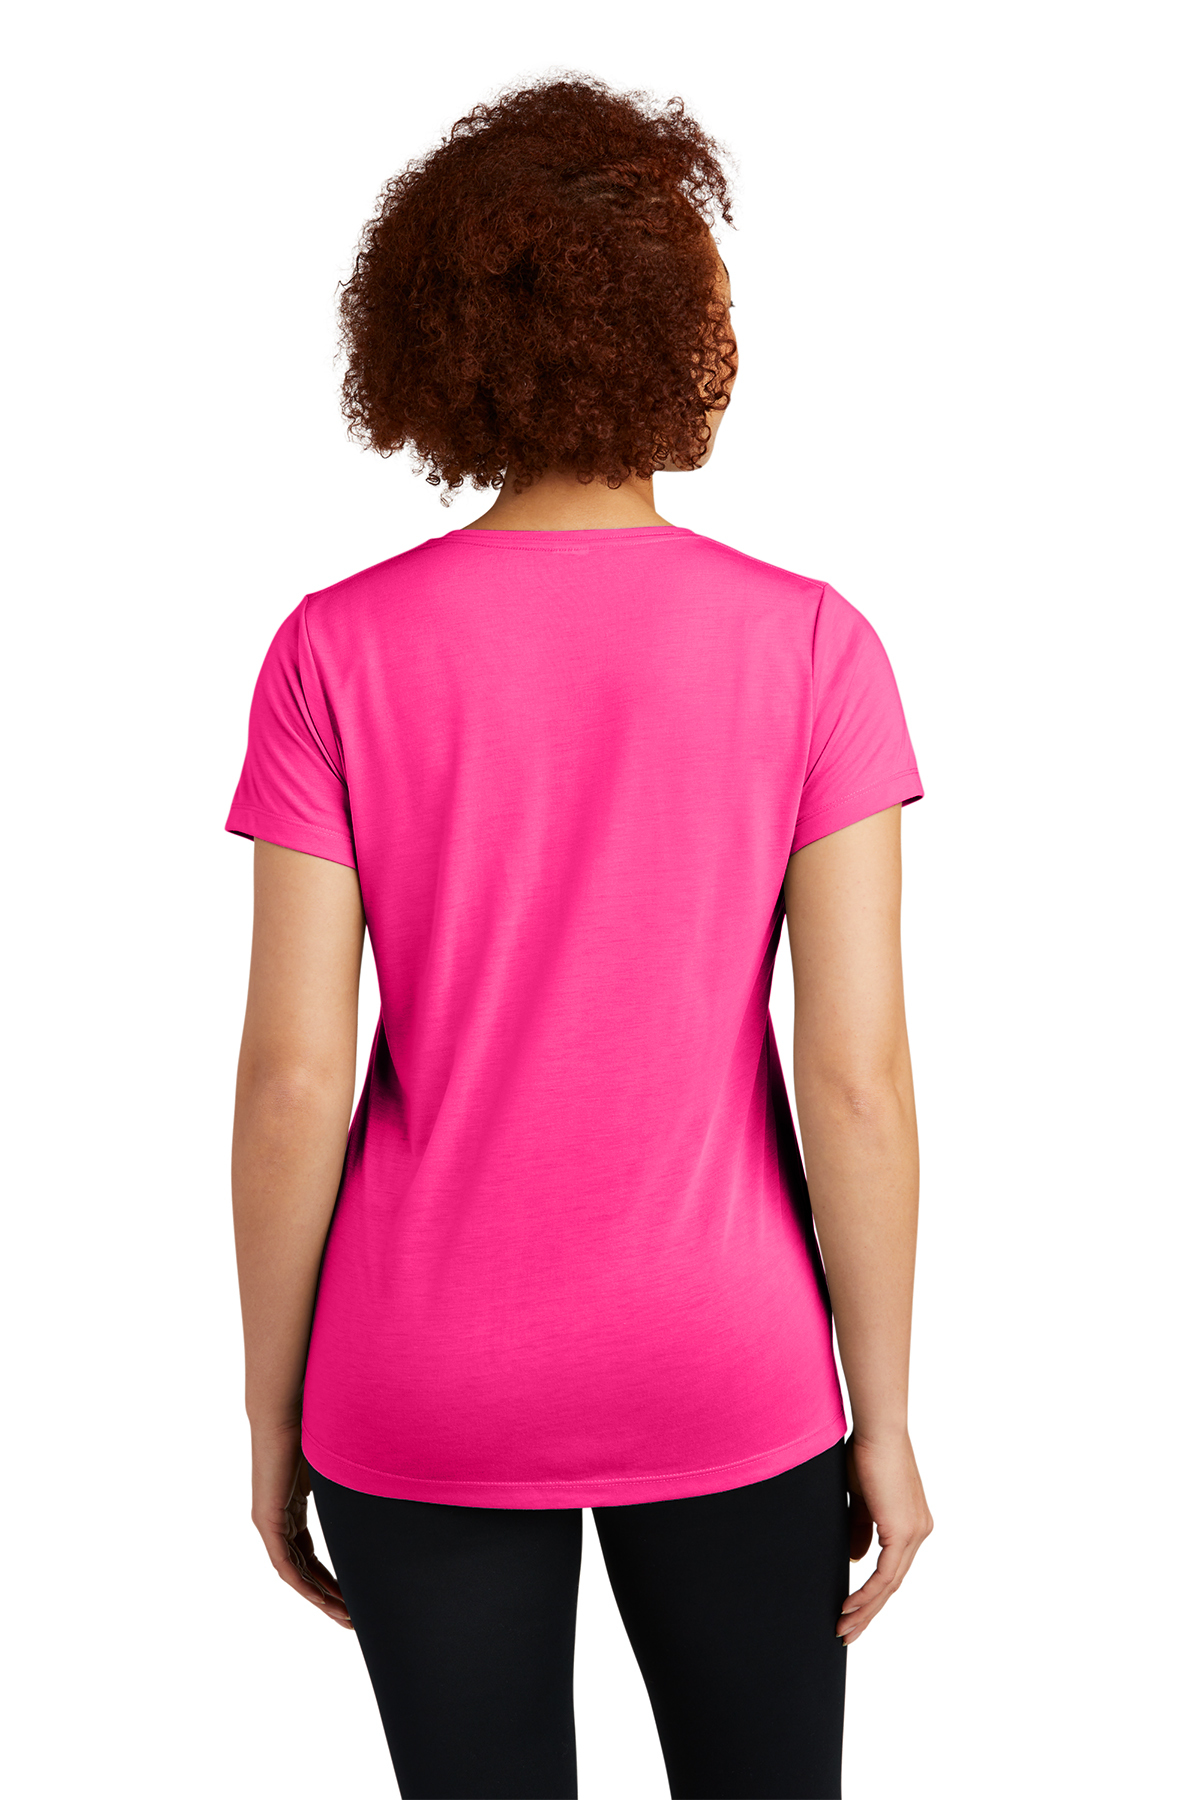 Sport-Tek Ladies PosiCharge Competitor™ Cotton Touch™ Scoop Neck Tee, Product